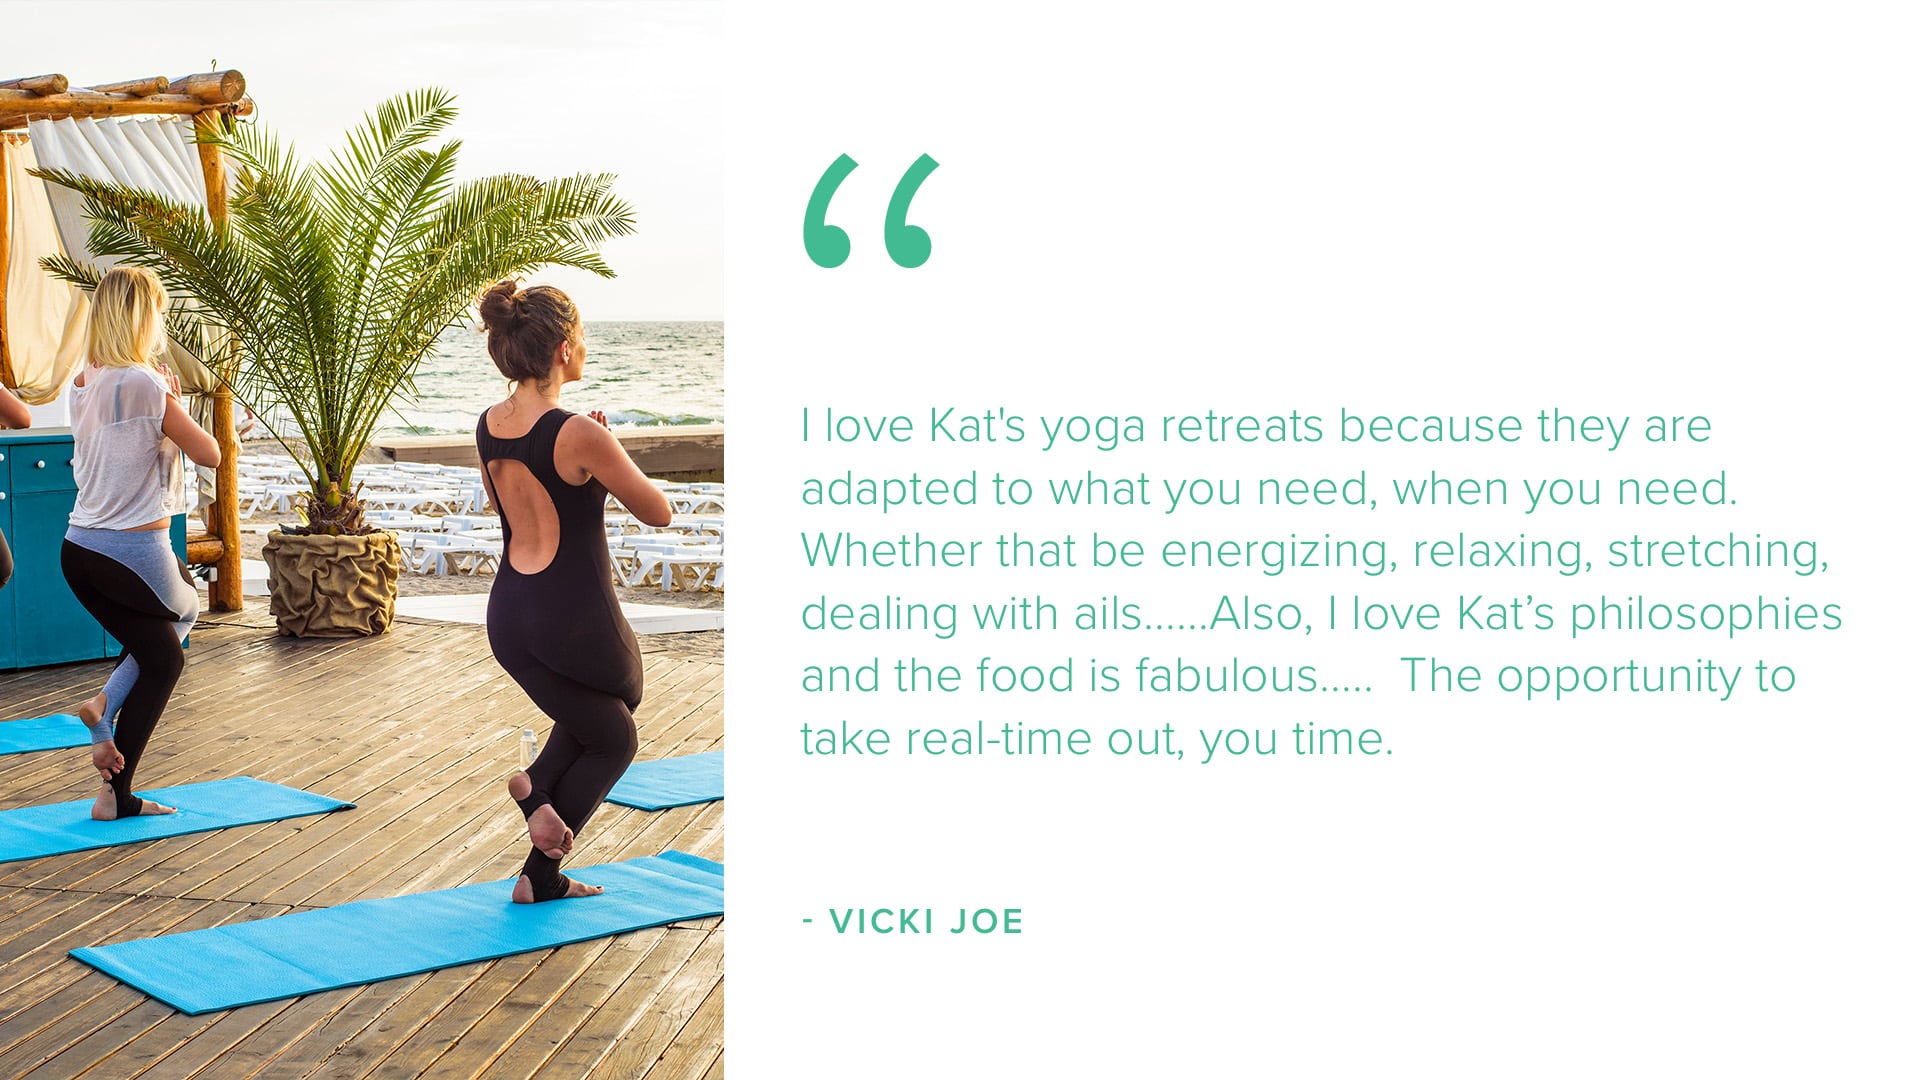 I love Kat's yoga retreats because they are adapted to what you need, when you need.